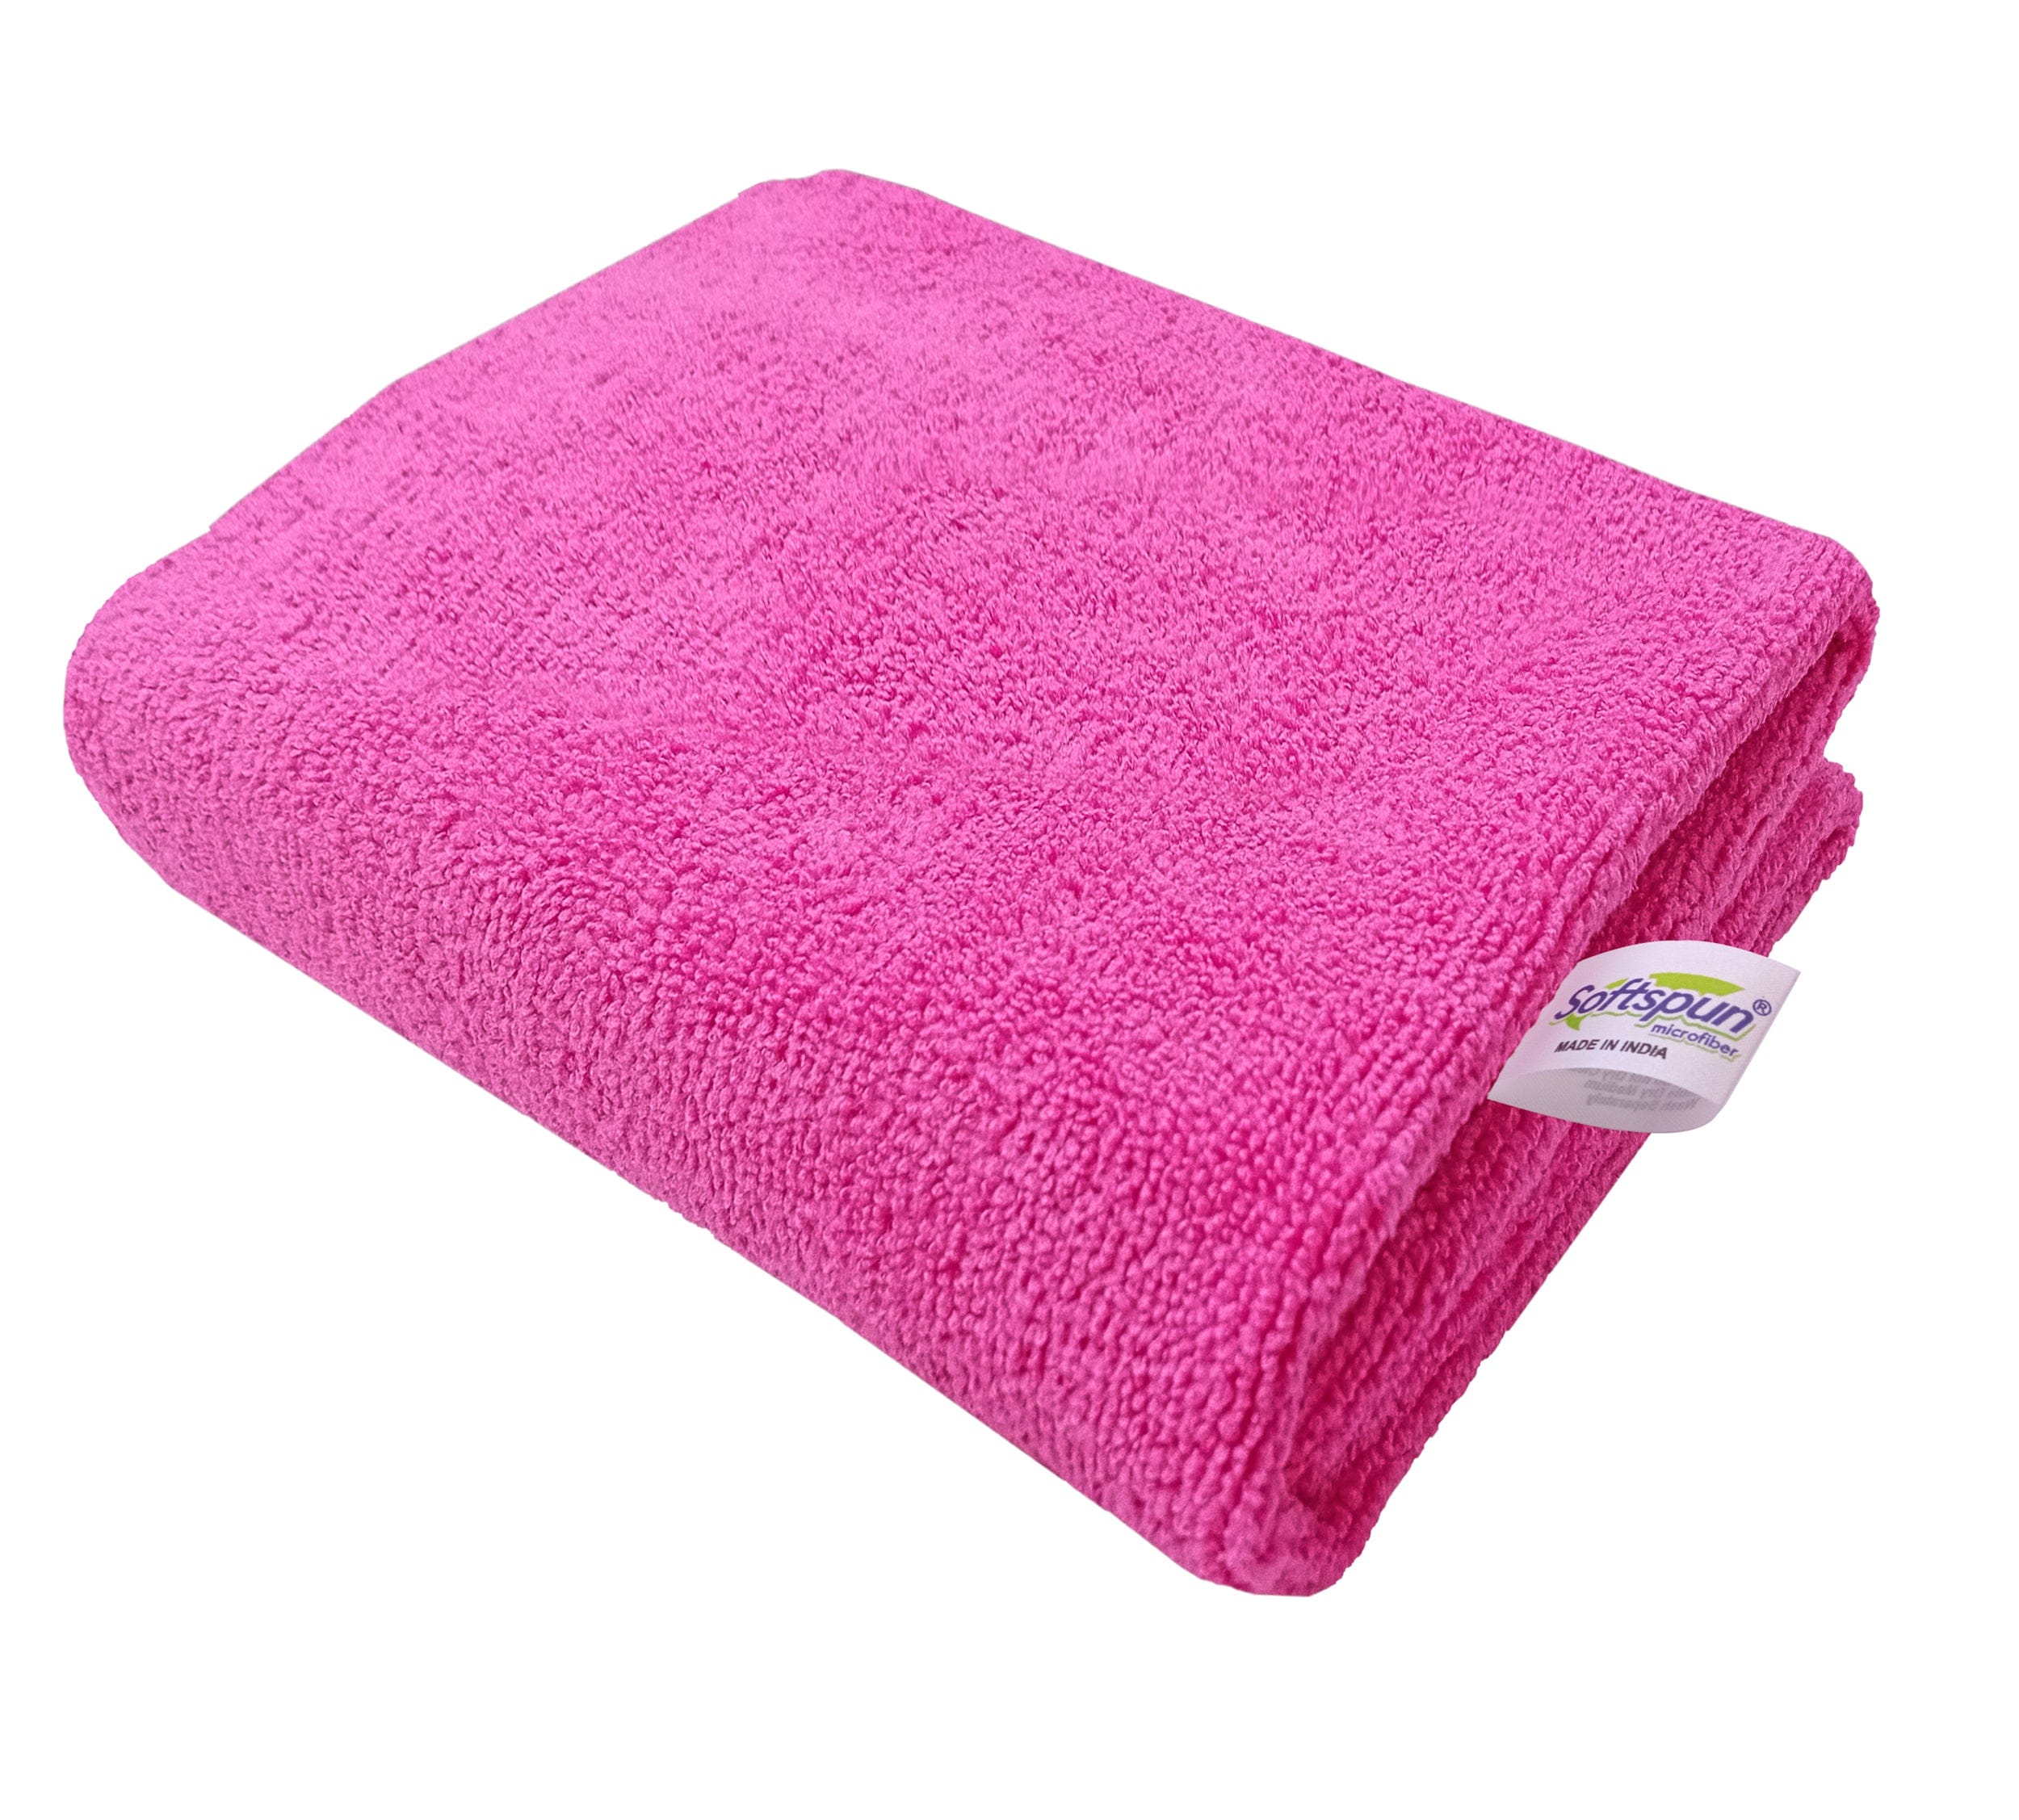 SOFTSPUN Microfiber Gym & Sports Towels for Men & Women 1 pcs, 340 GSM. Fast Drying, Super Absorbent, Lightweight & Ultra-Compact Sweat Towels for Working Out Camping, Hiking, Travel